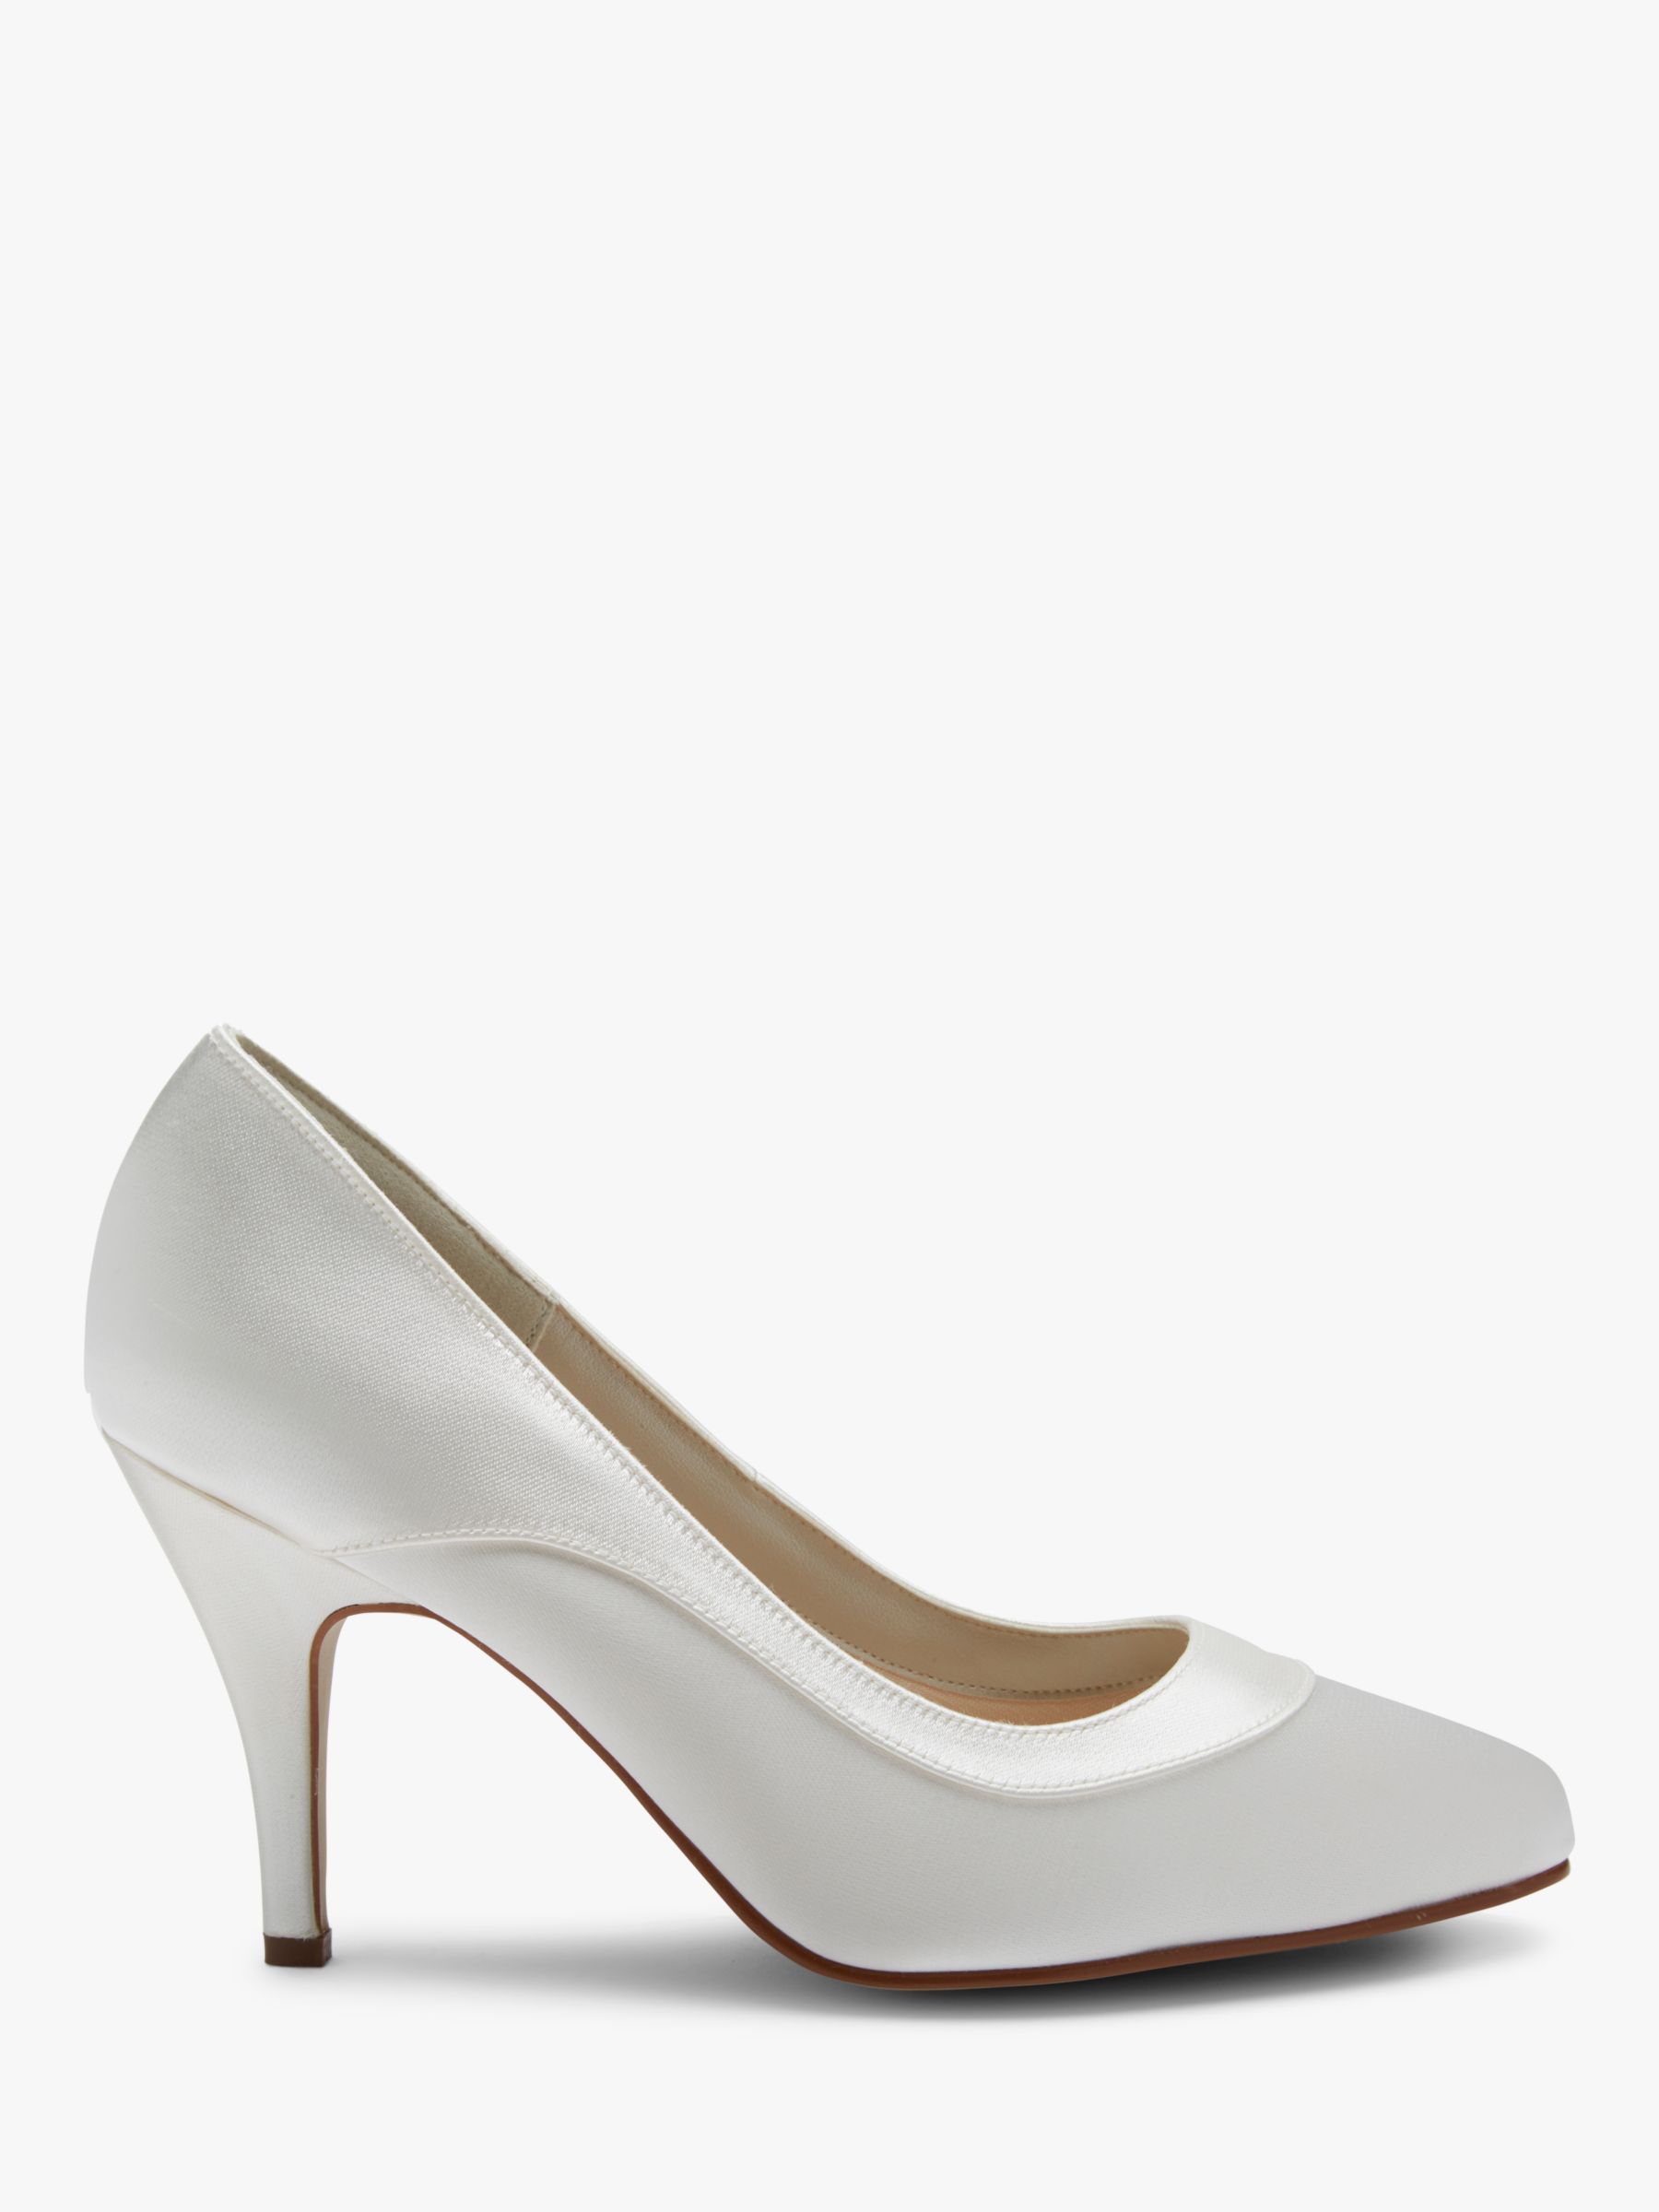 Rainbow Club Nicole Extra Wide Fit Satin Court Shoes, Ivory at John Lewis